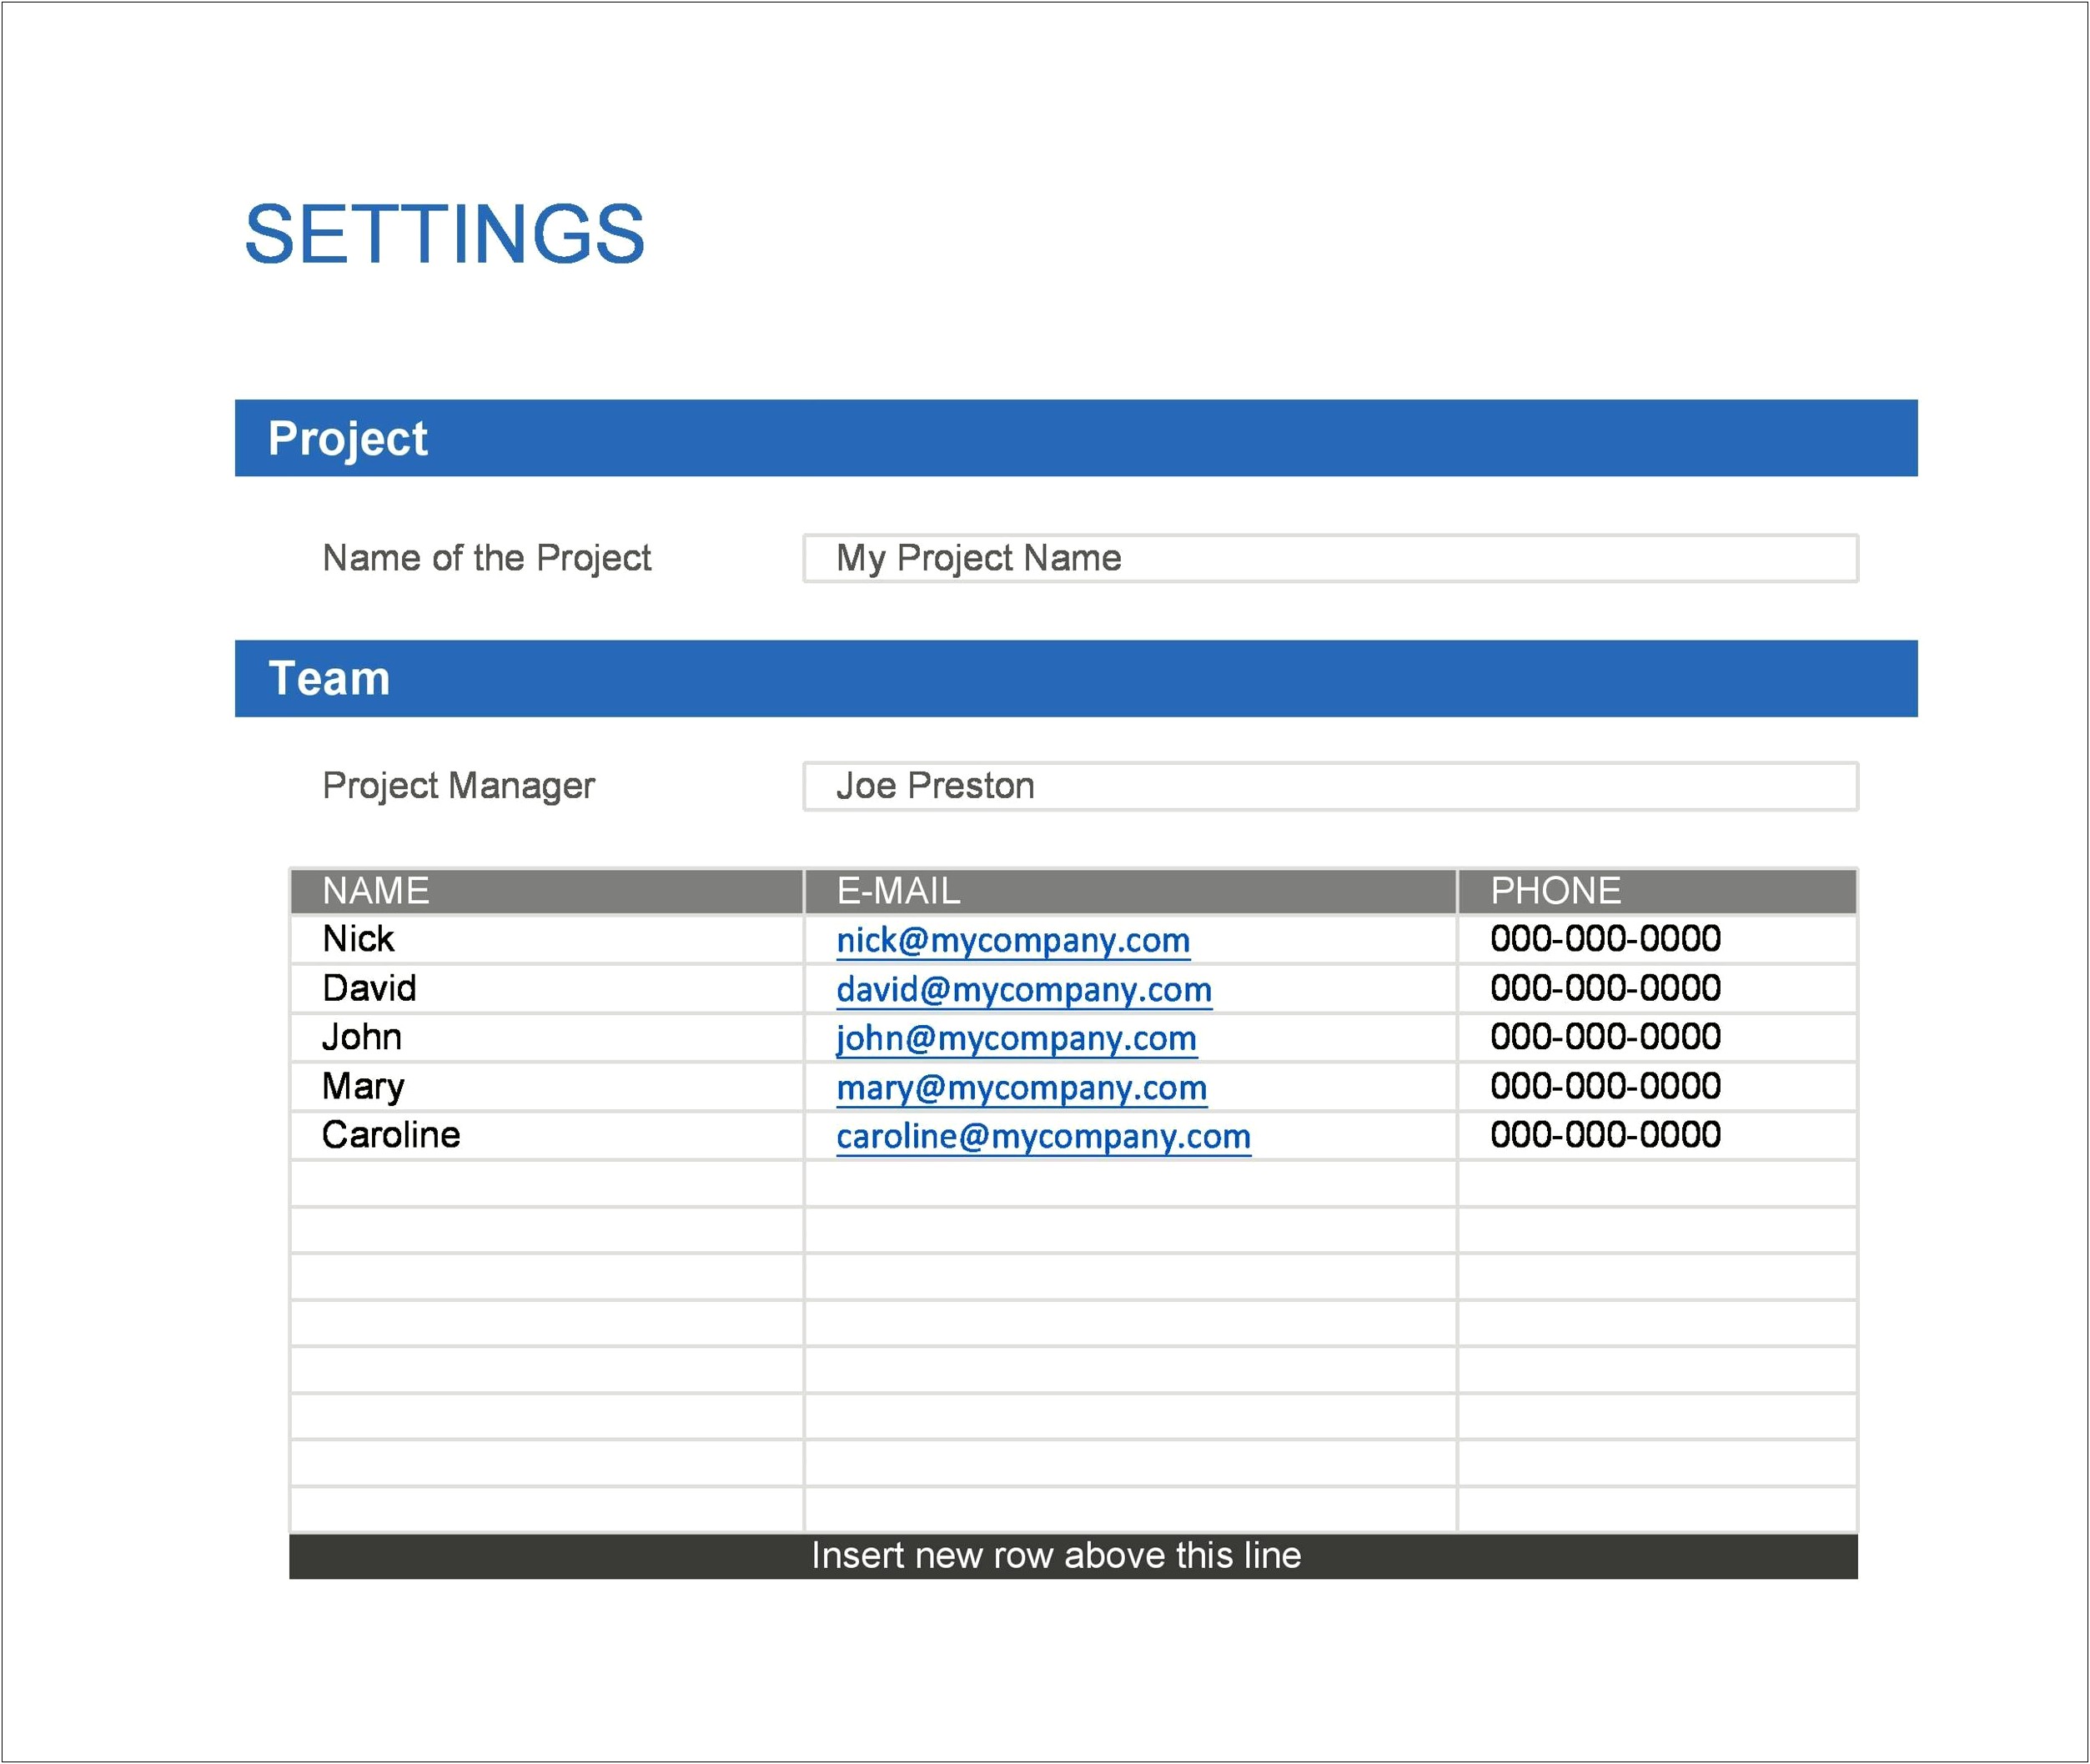 Project Plan Template Free Download Word